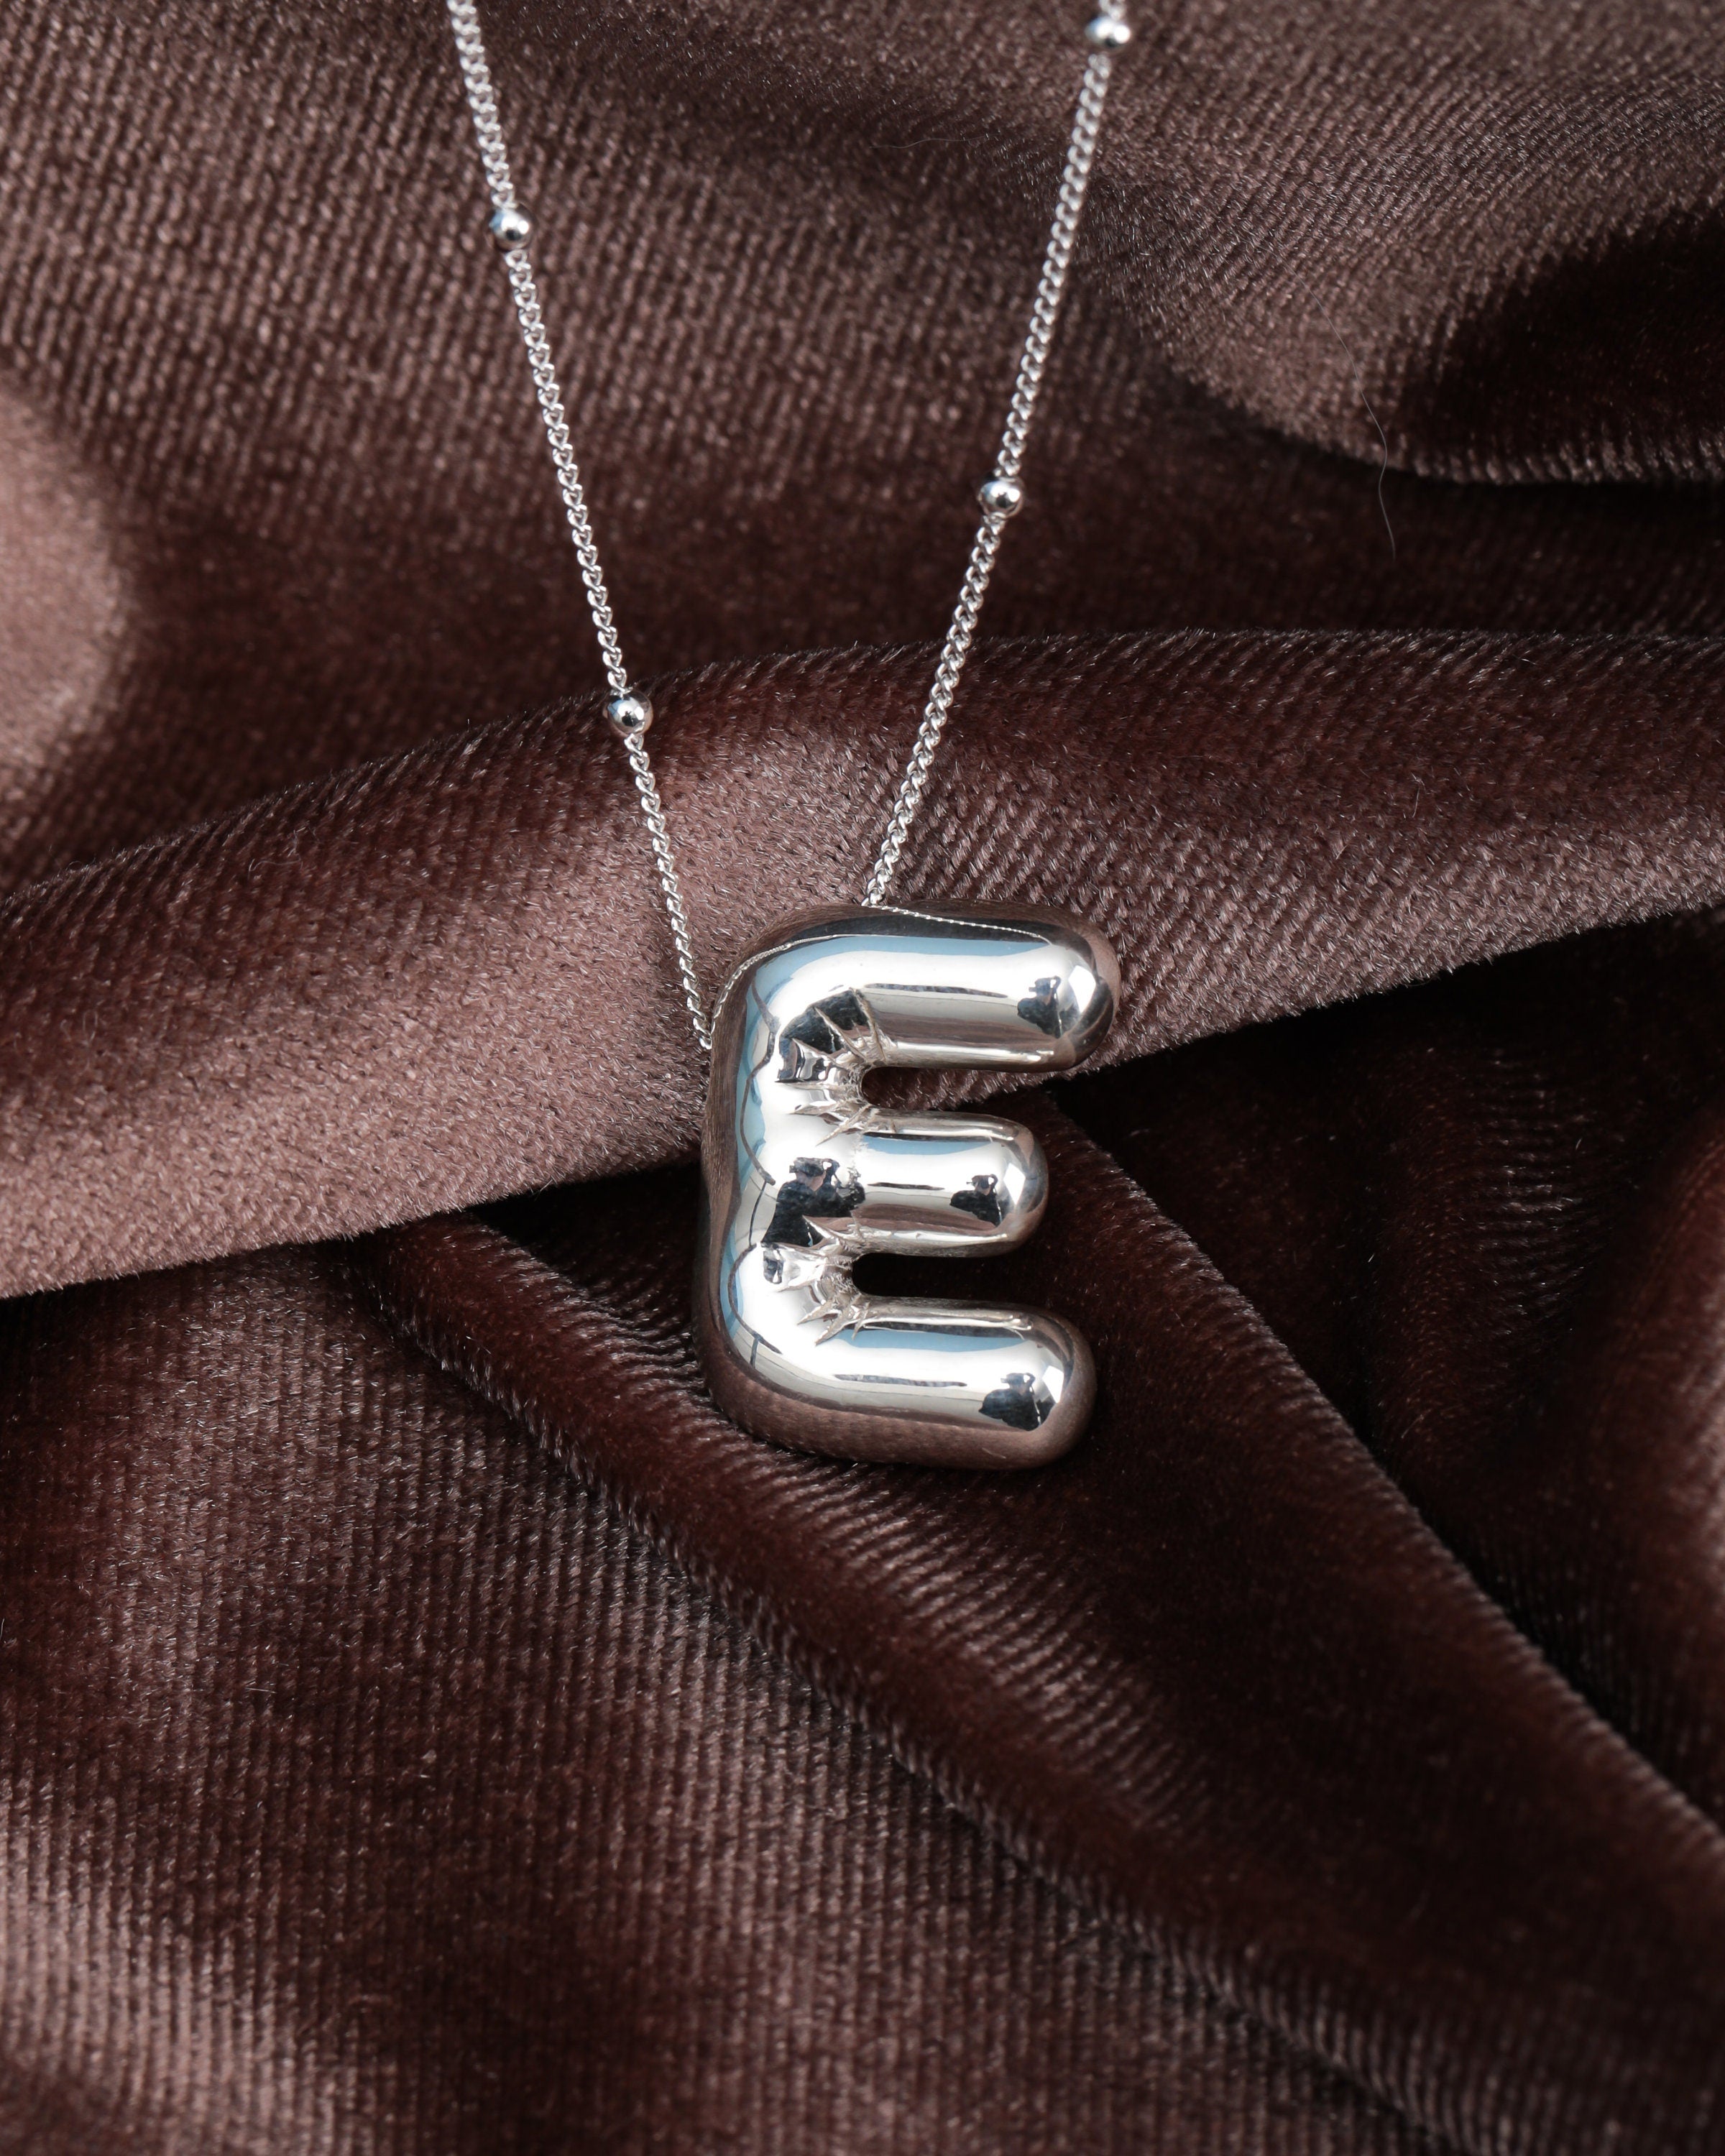 ALIX JEWELED CZ BUBBLE LETTER INITIAL NECKLACE (Letters A-Z available) –  DawnTayler Boutique